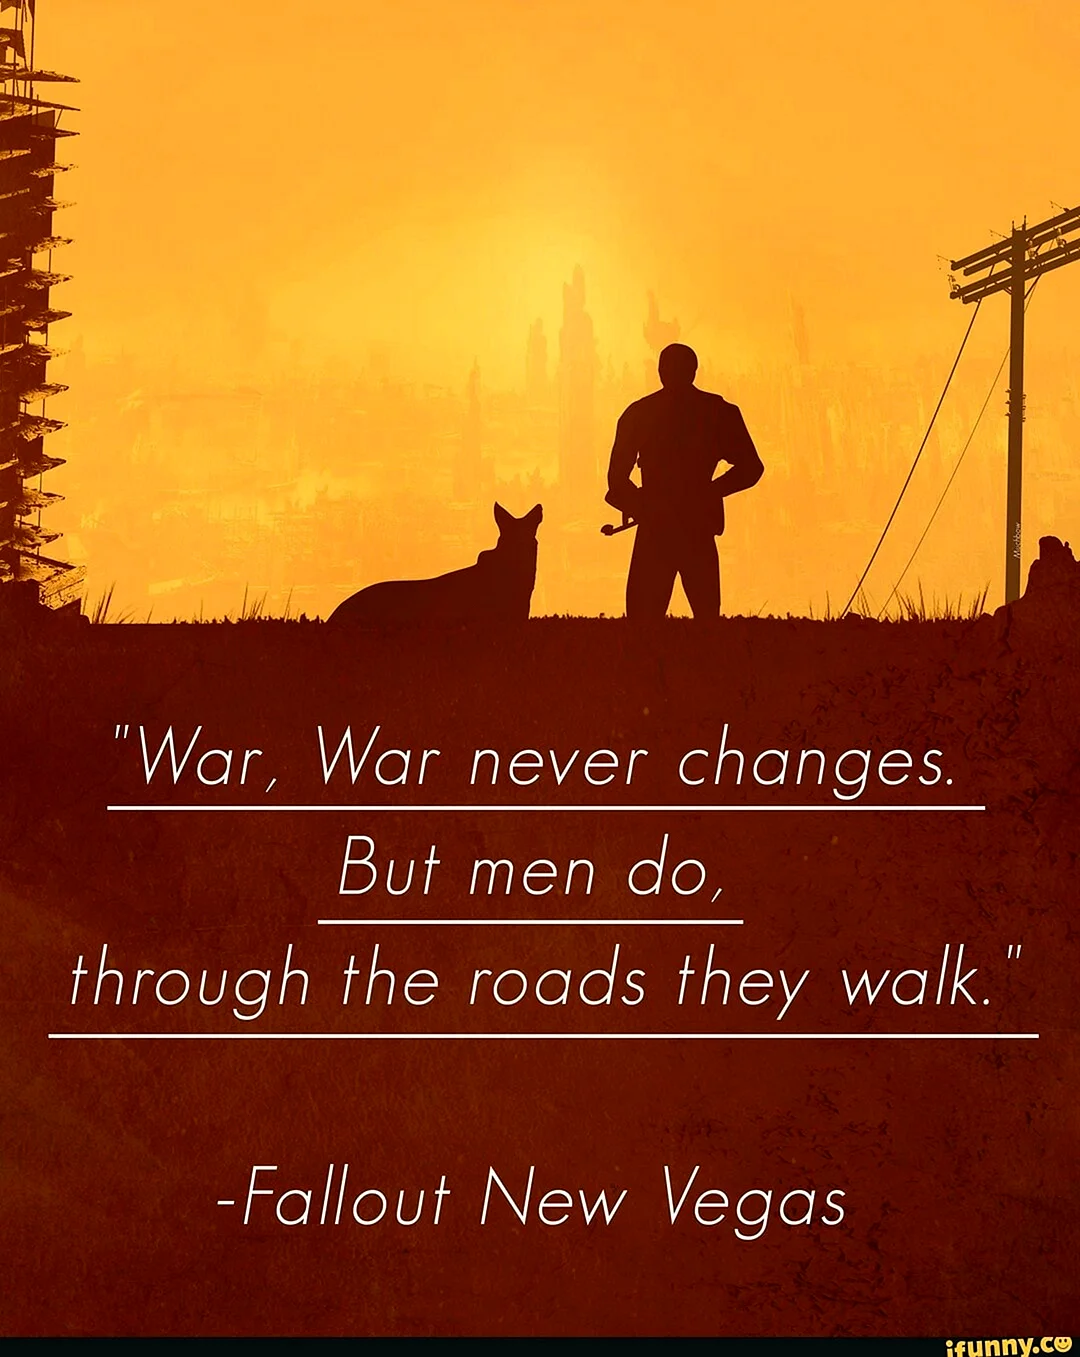 Fallout 4 Poster Wallpaper For iPhone